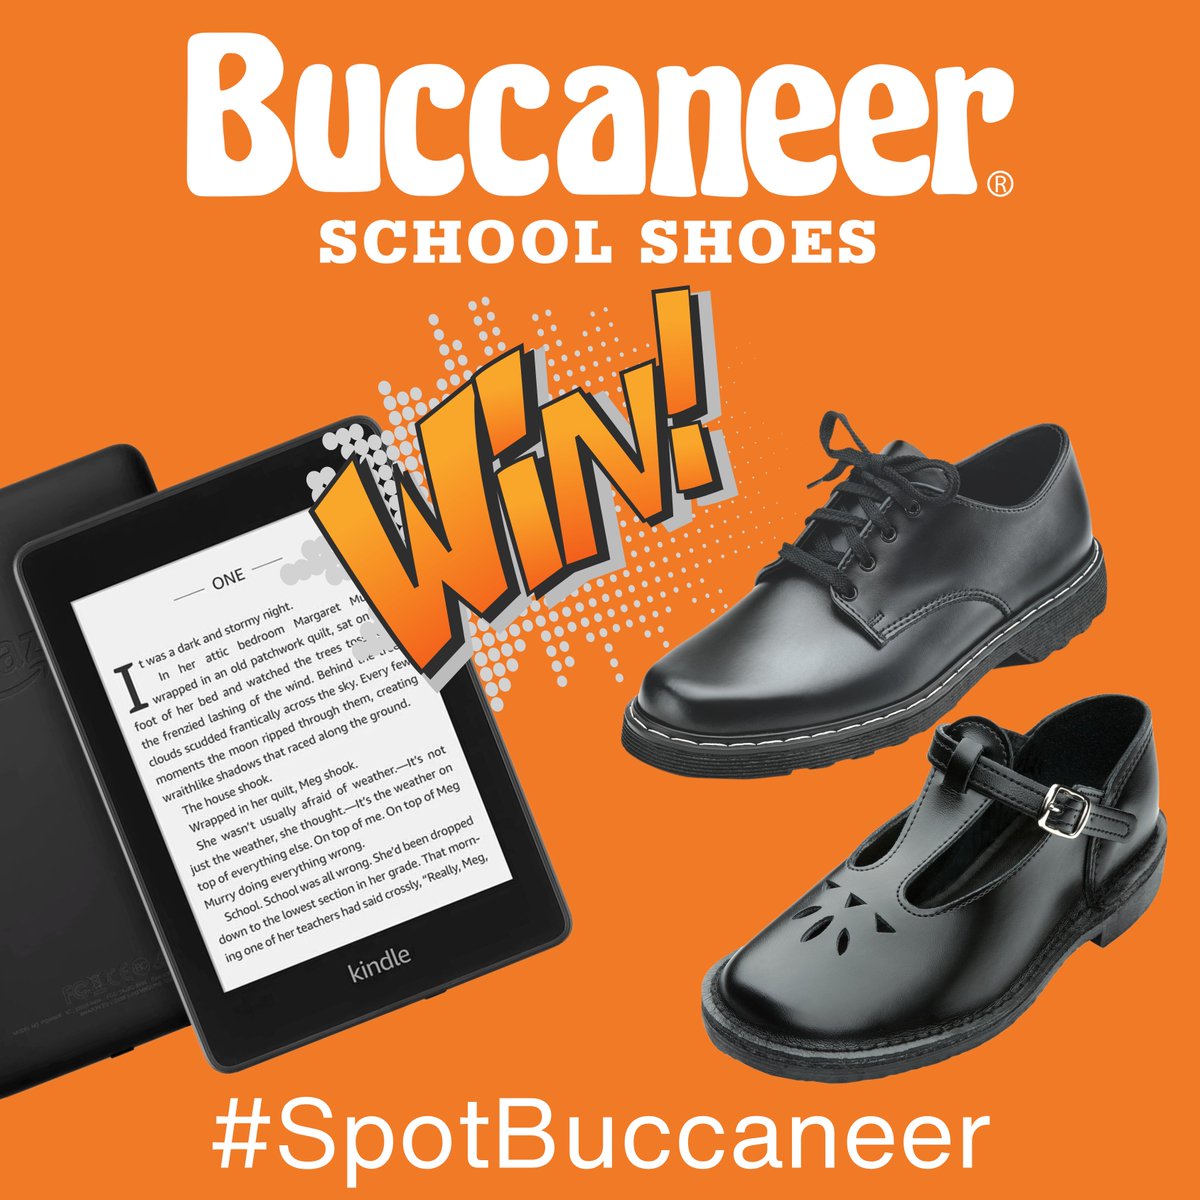 We've already done 1 giveaway - so that's 4 more to go in our annual competition 👀. 🎉🎊😁 Simply spot your favourite pair of Buccaneer School Shoes, snap a pic, and share it on Instagram, Twitter, or Facebook with the hashtag #SpotBuccaneer. We'll be having weekly prize draws.